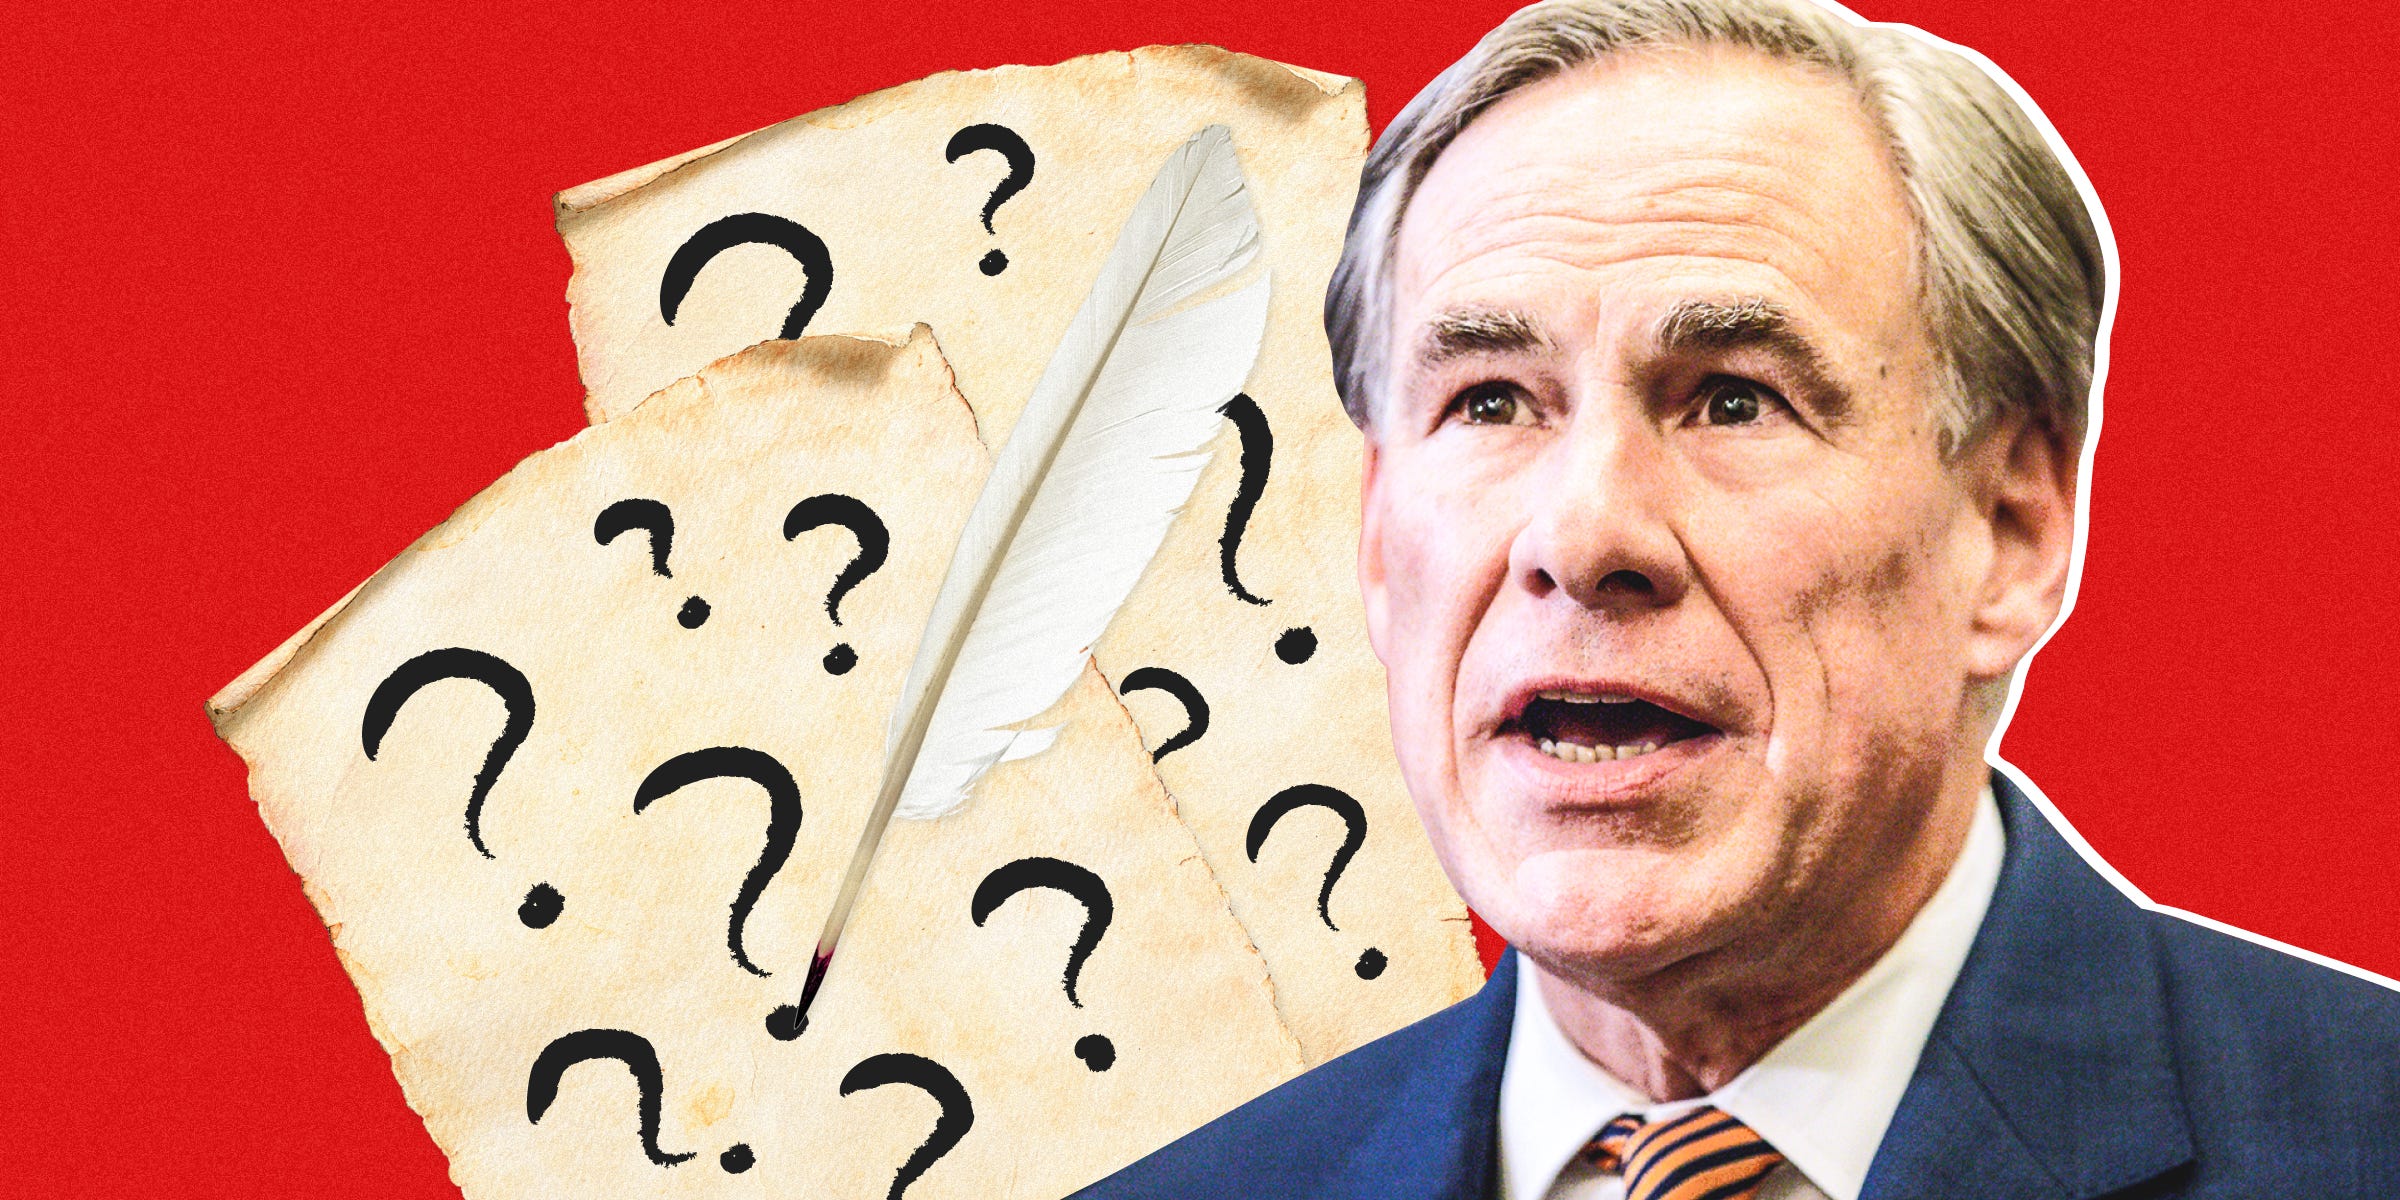 Texas governor Greg Abbott with a feather quill drawing question marks on pieces of old parchment paper on a red background